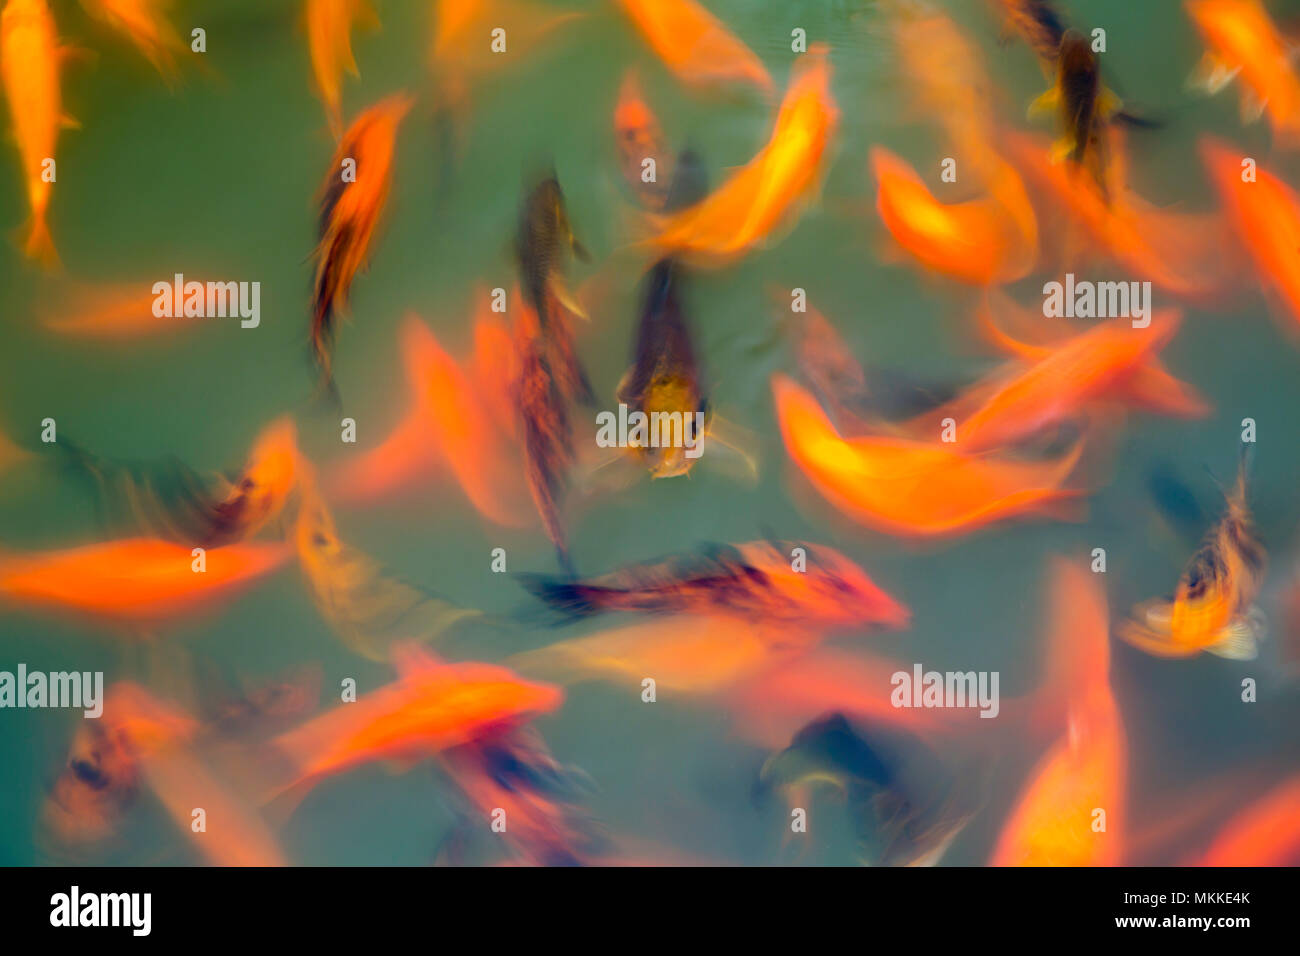 A motion blurred image of ornamental koi fish, Cyprinus carpio, at one of the ponds in the Buddha Eden Garden, Carvalhal, Portugal. Stock Photo